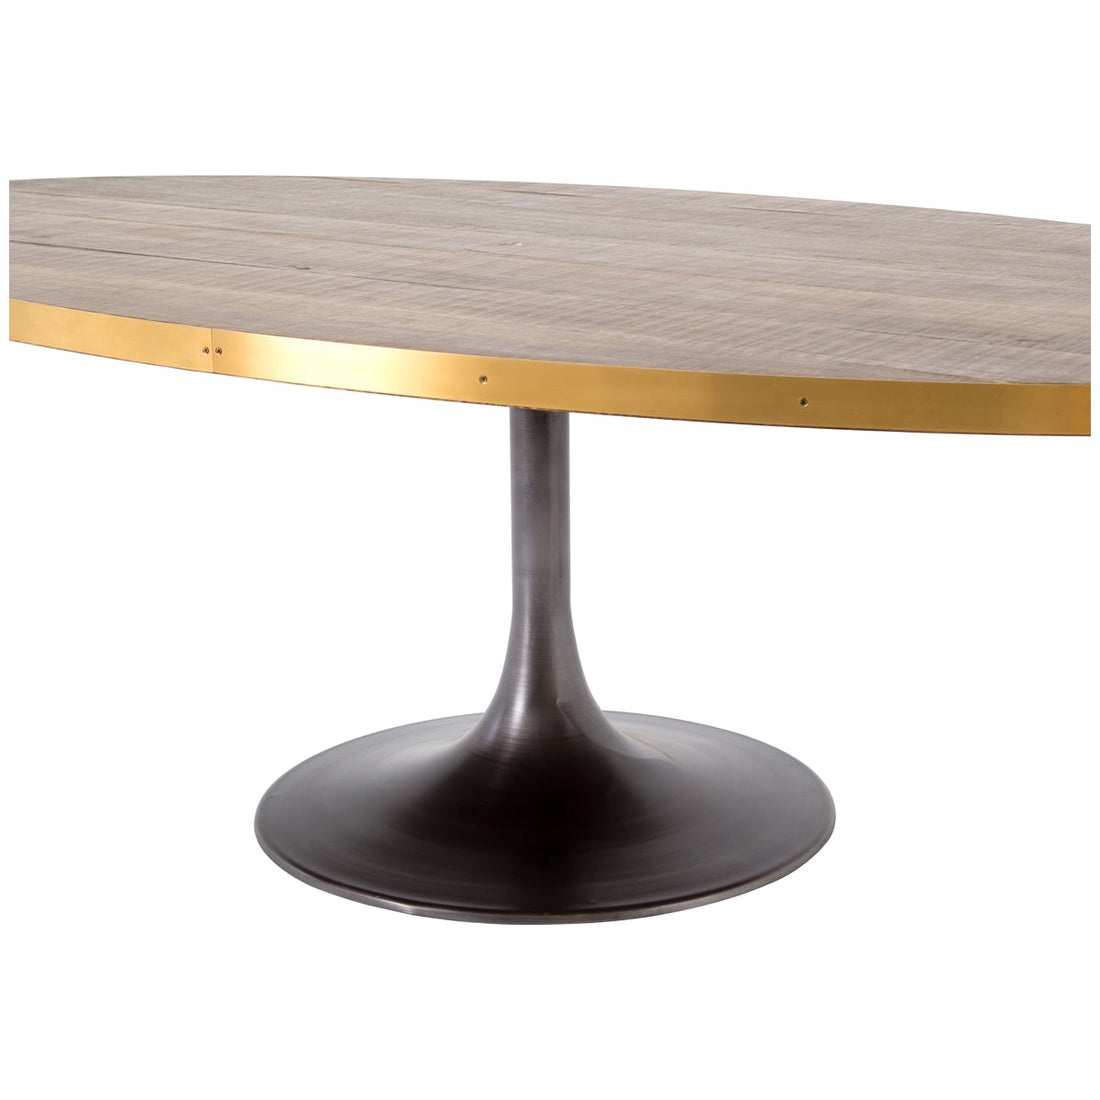 Four Hands Hughes Evans Oval Dining Table